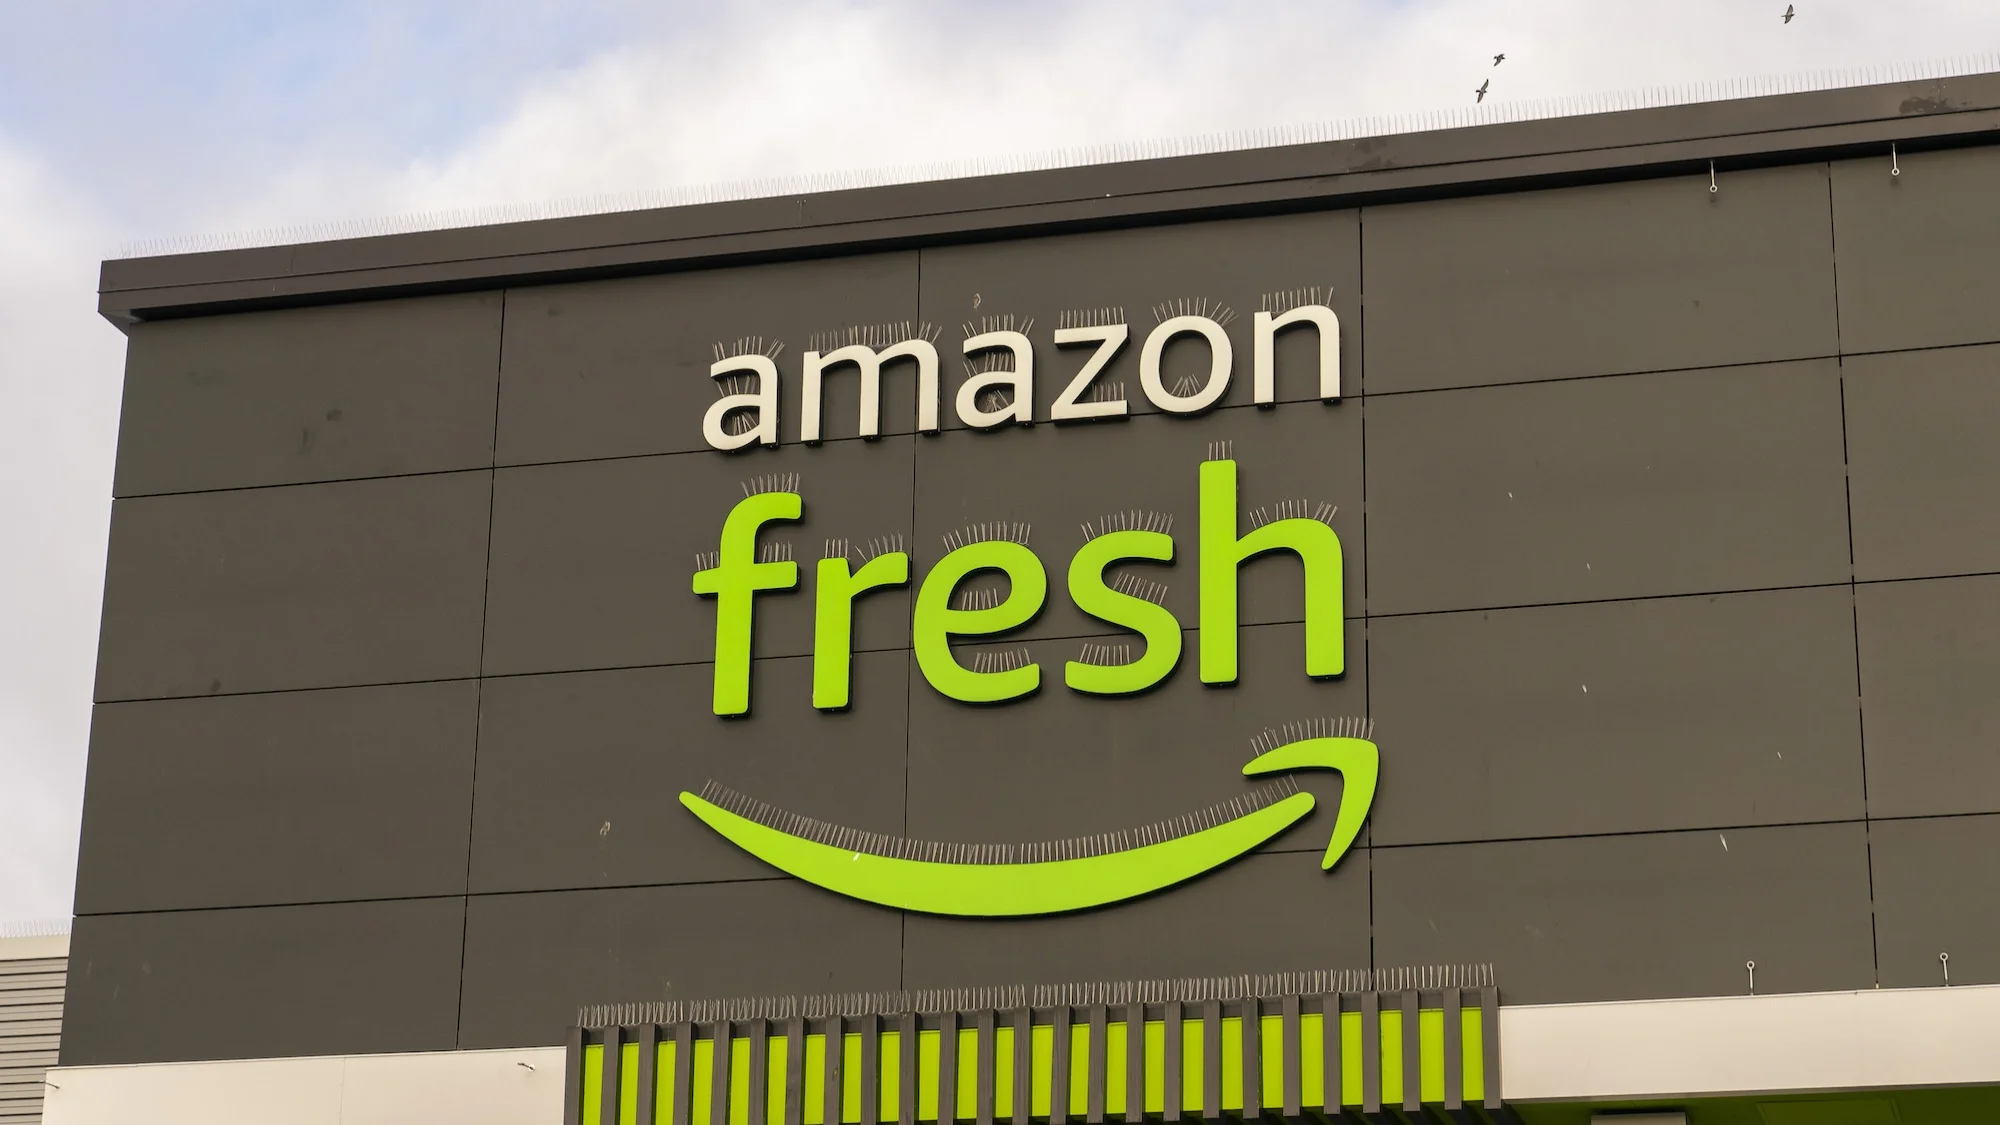 Shopping Smarter: How Amazon Fresh's Big Price Drops Are Shaking Up Grocery Deals Against Walmart and Target